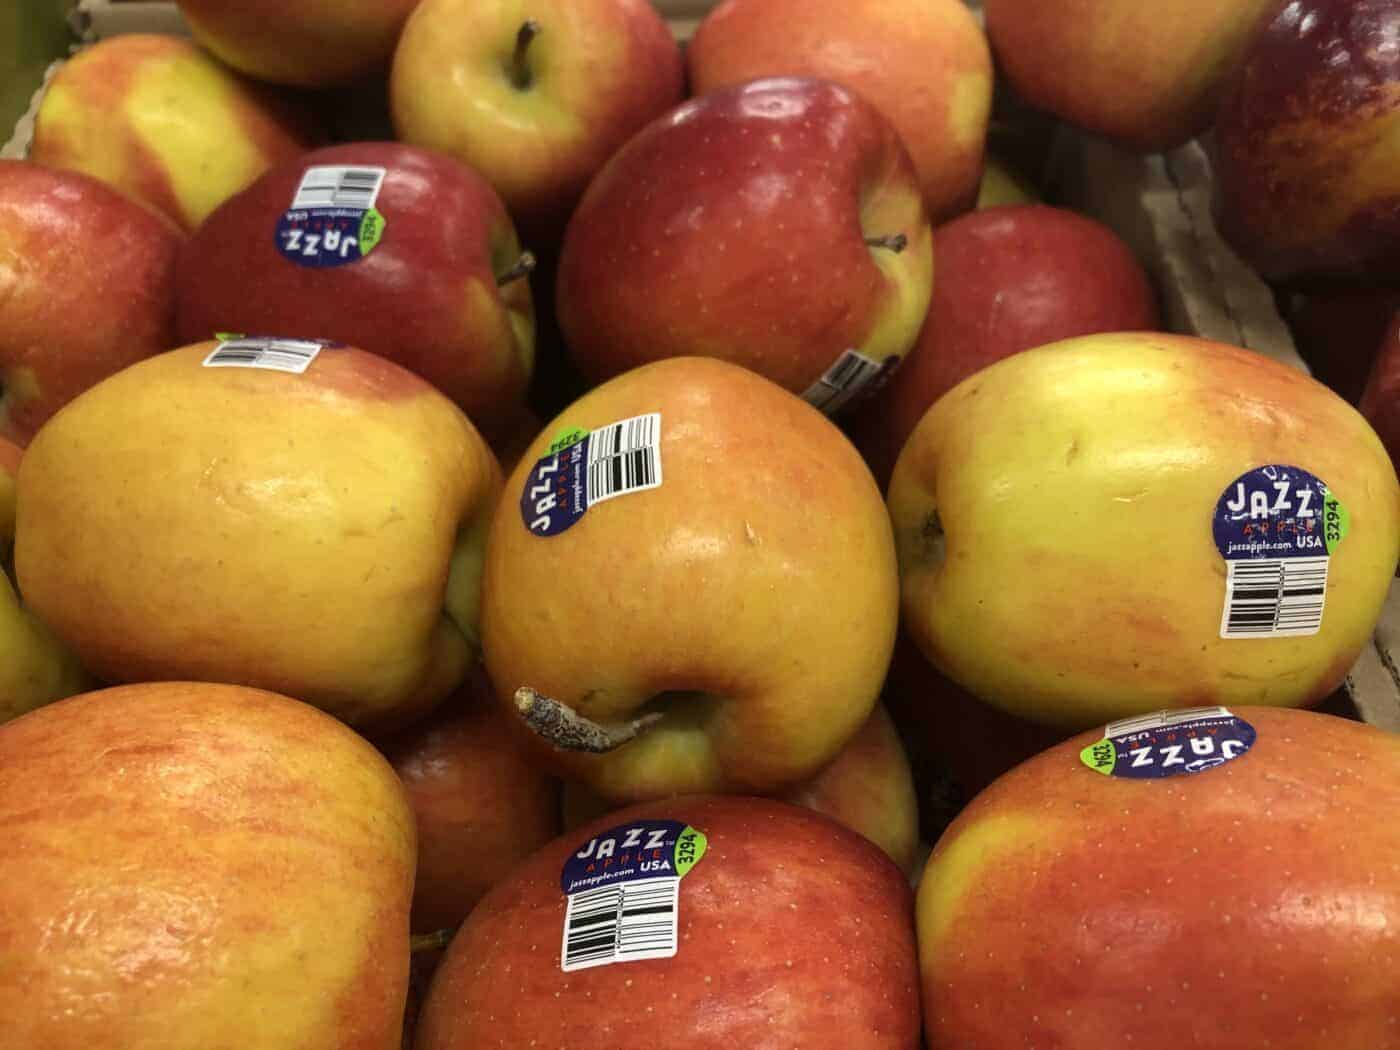 Jazz apples at the supermarket